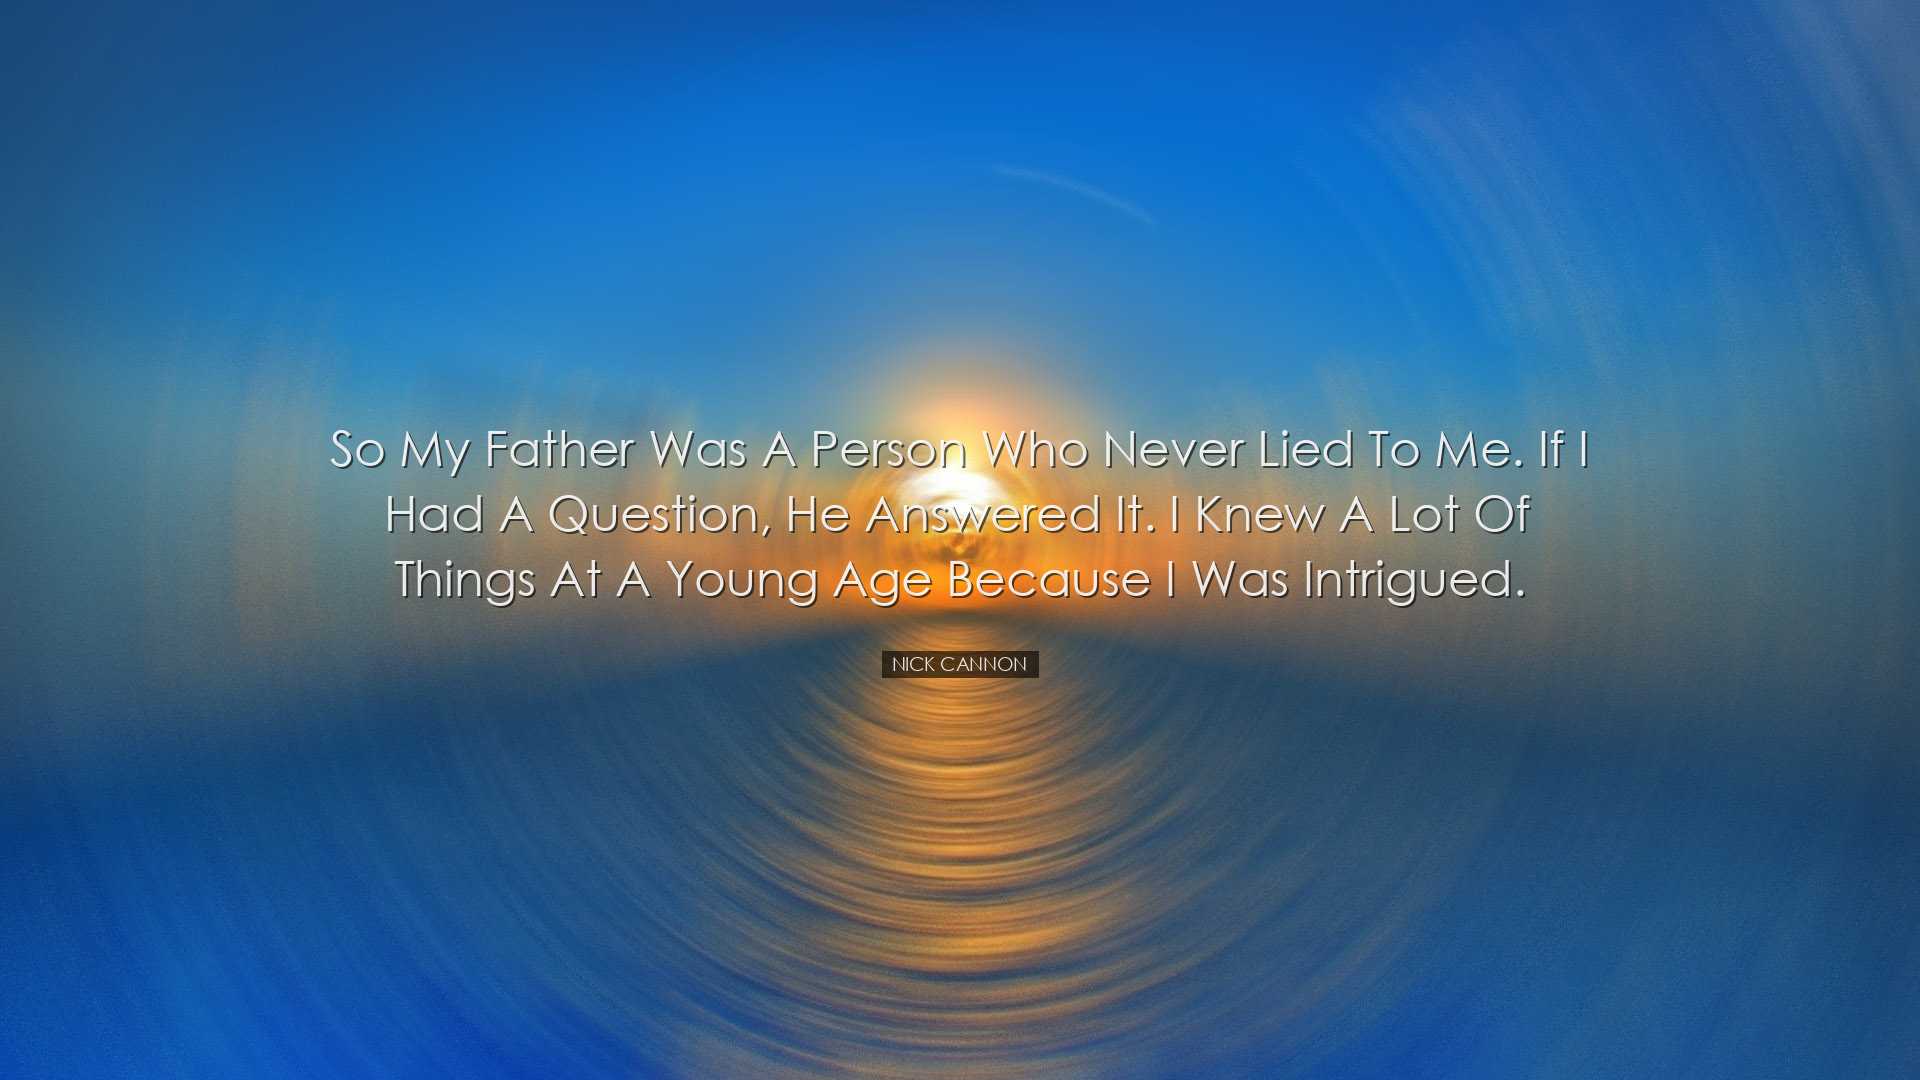 So my father was a person who never lied to me. If I had a questio